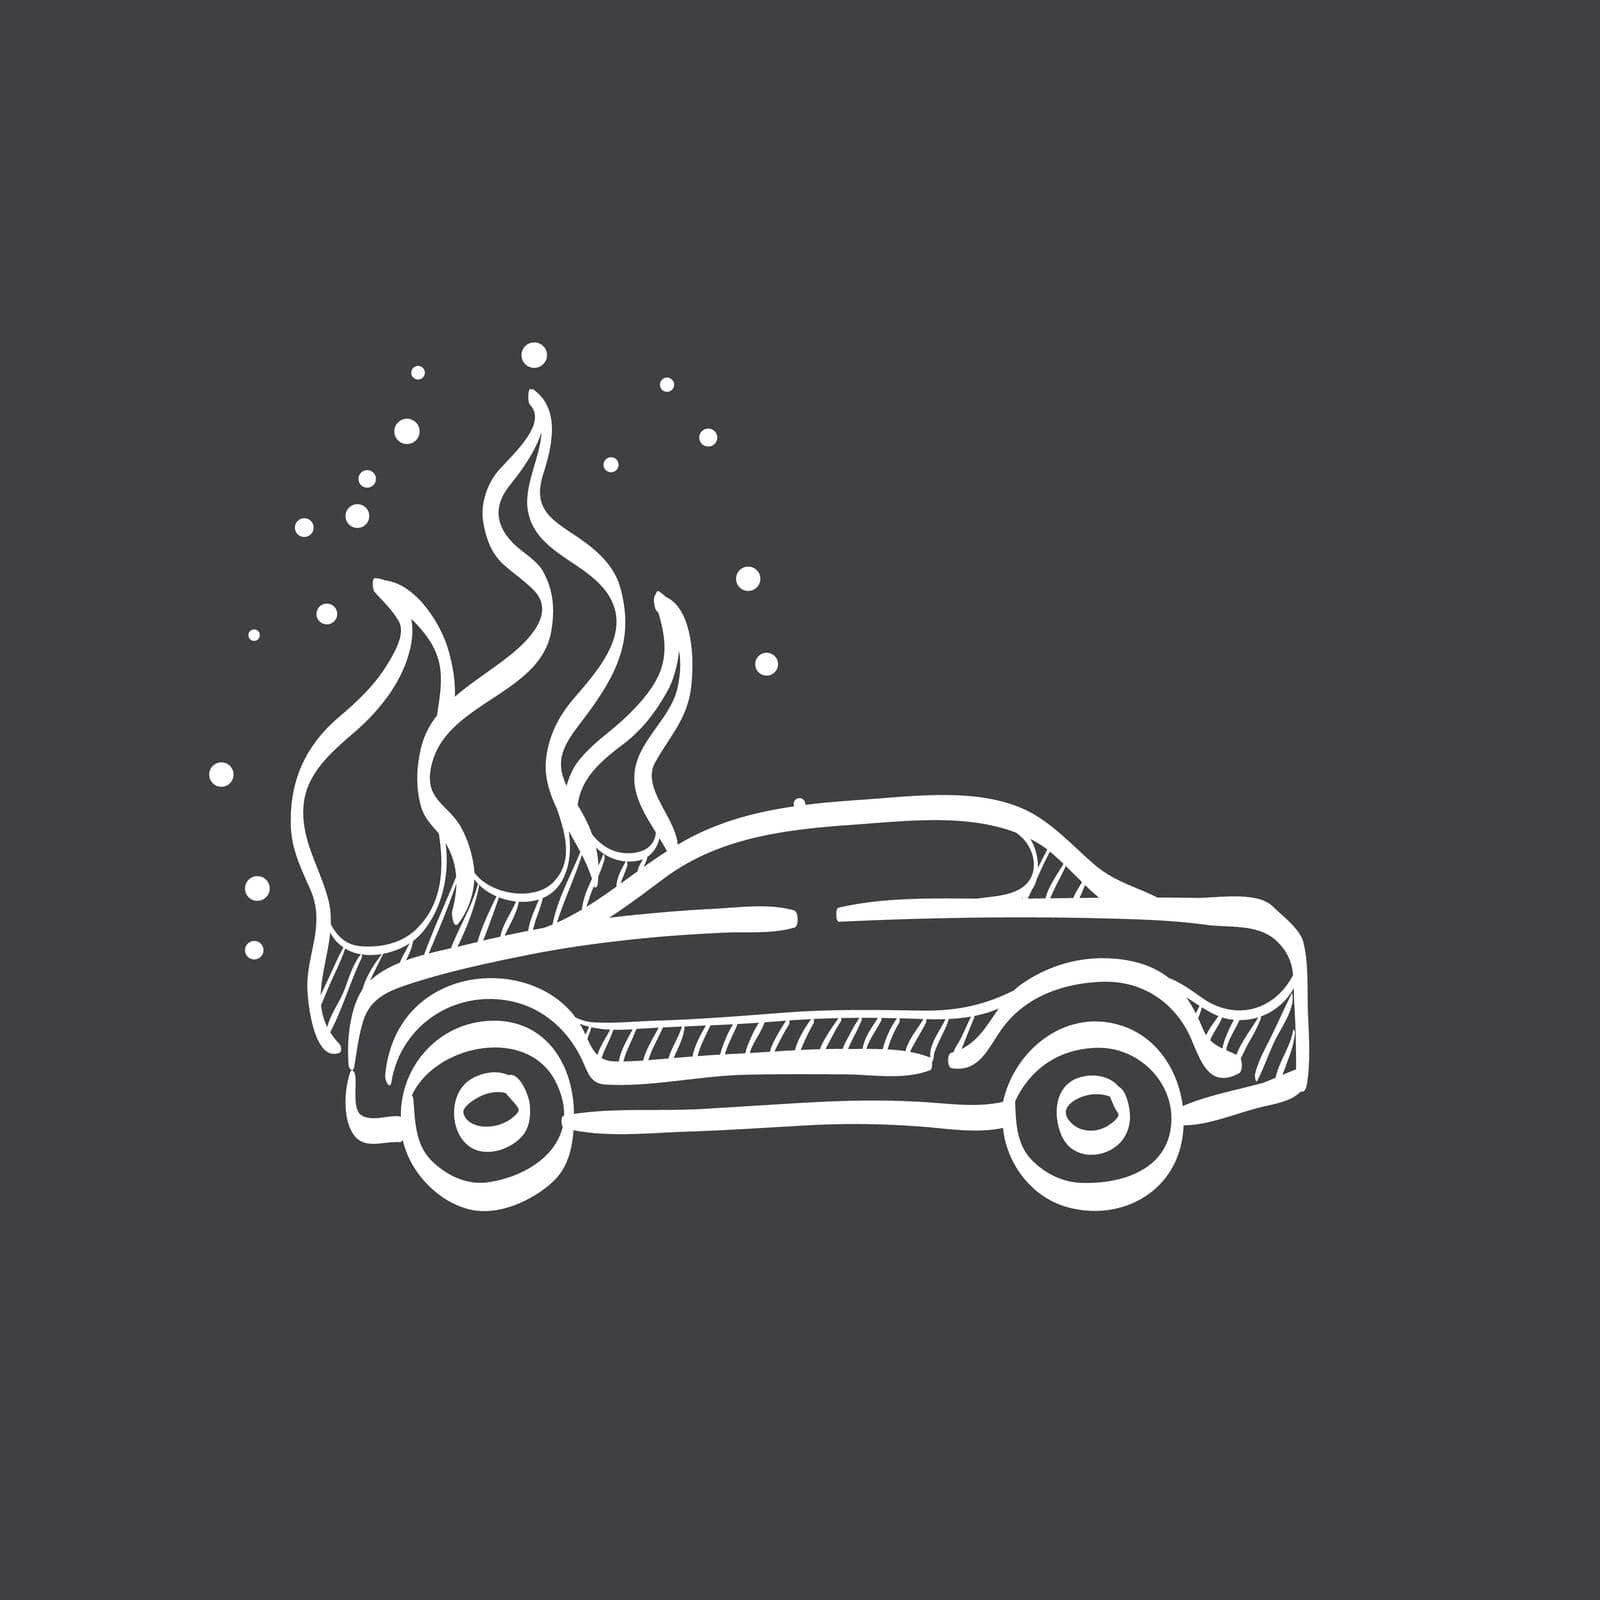 Car on fire icon in doodle sketch lines. Automotive transportation accident accident burned insurance claim